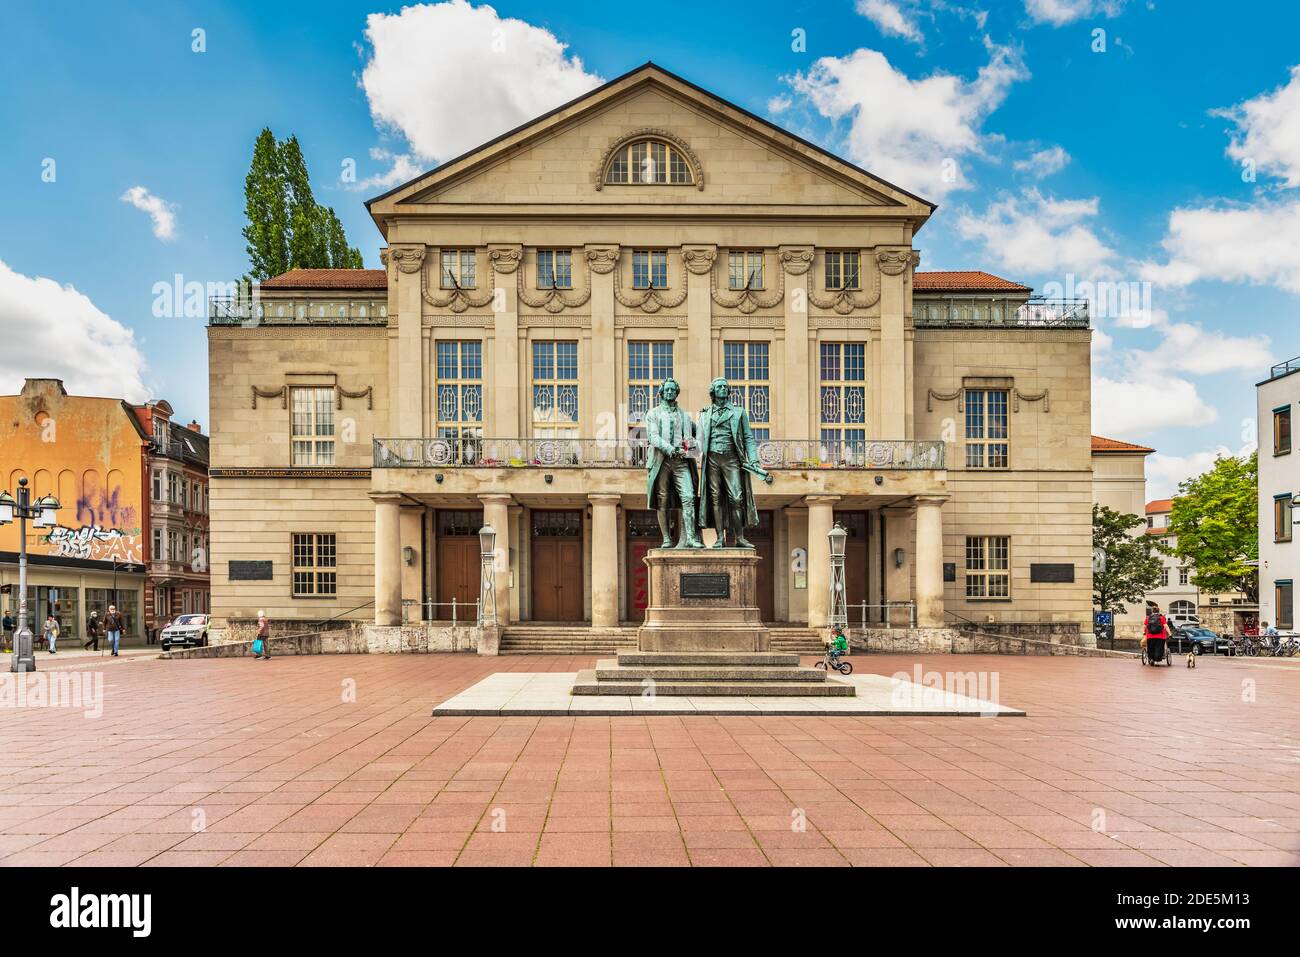 The Goethe-Schiller monument stands in front of the German National Theater on the Theaterplatz in Weimar, Thuringia, Germany, Europe Stock Photo